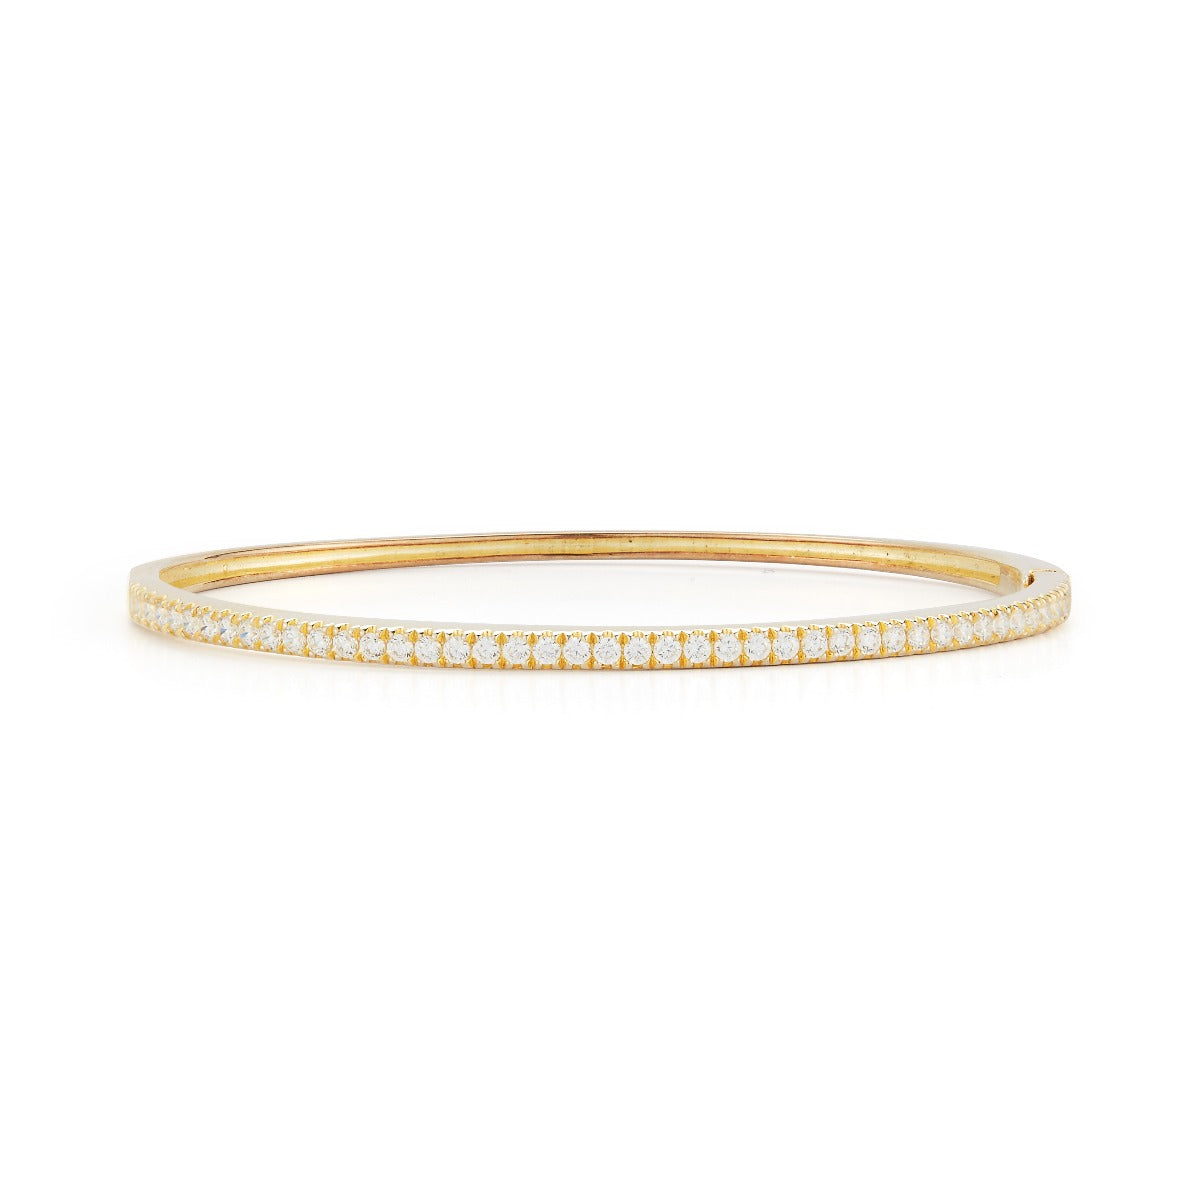 14K CLASSIC BANGLE PERFECT STACKING WITH DIAMONDS 1.07CT